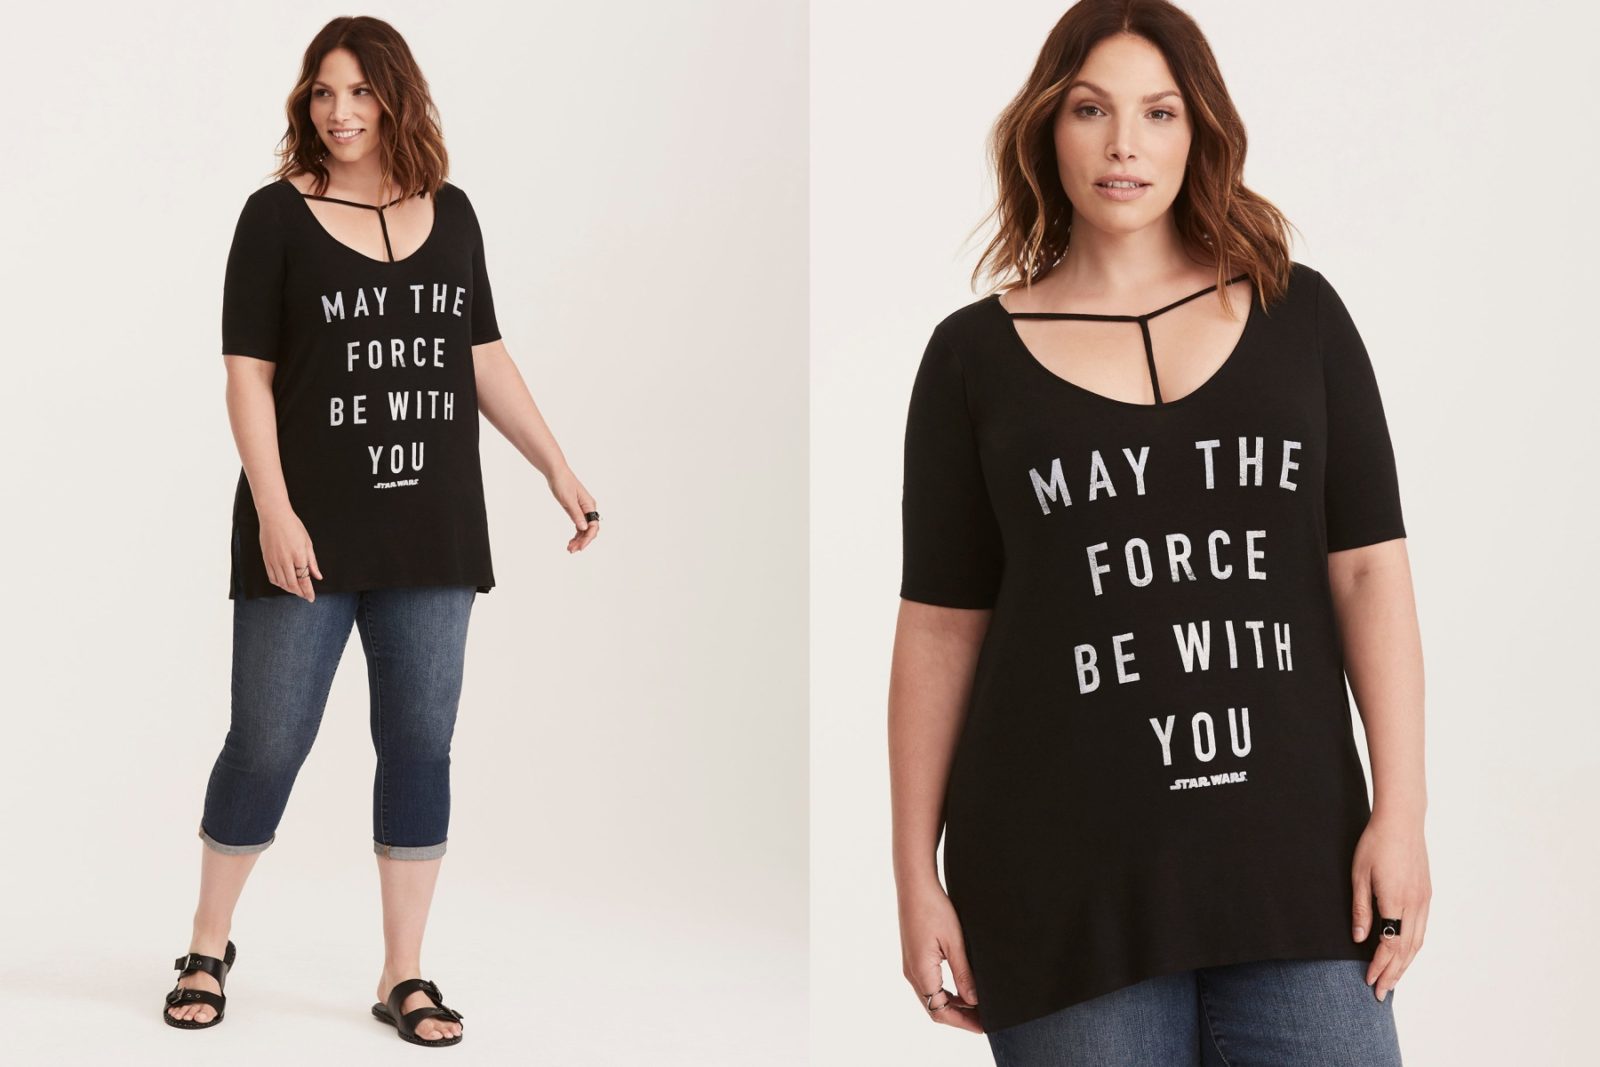 Women's Star Wars May The Force Be With You strappy plus size t-shirt at Torrid